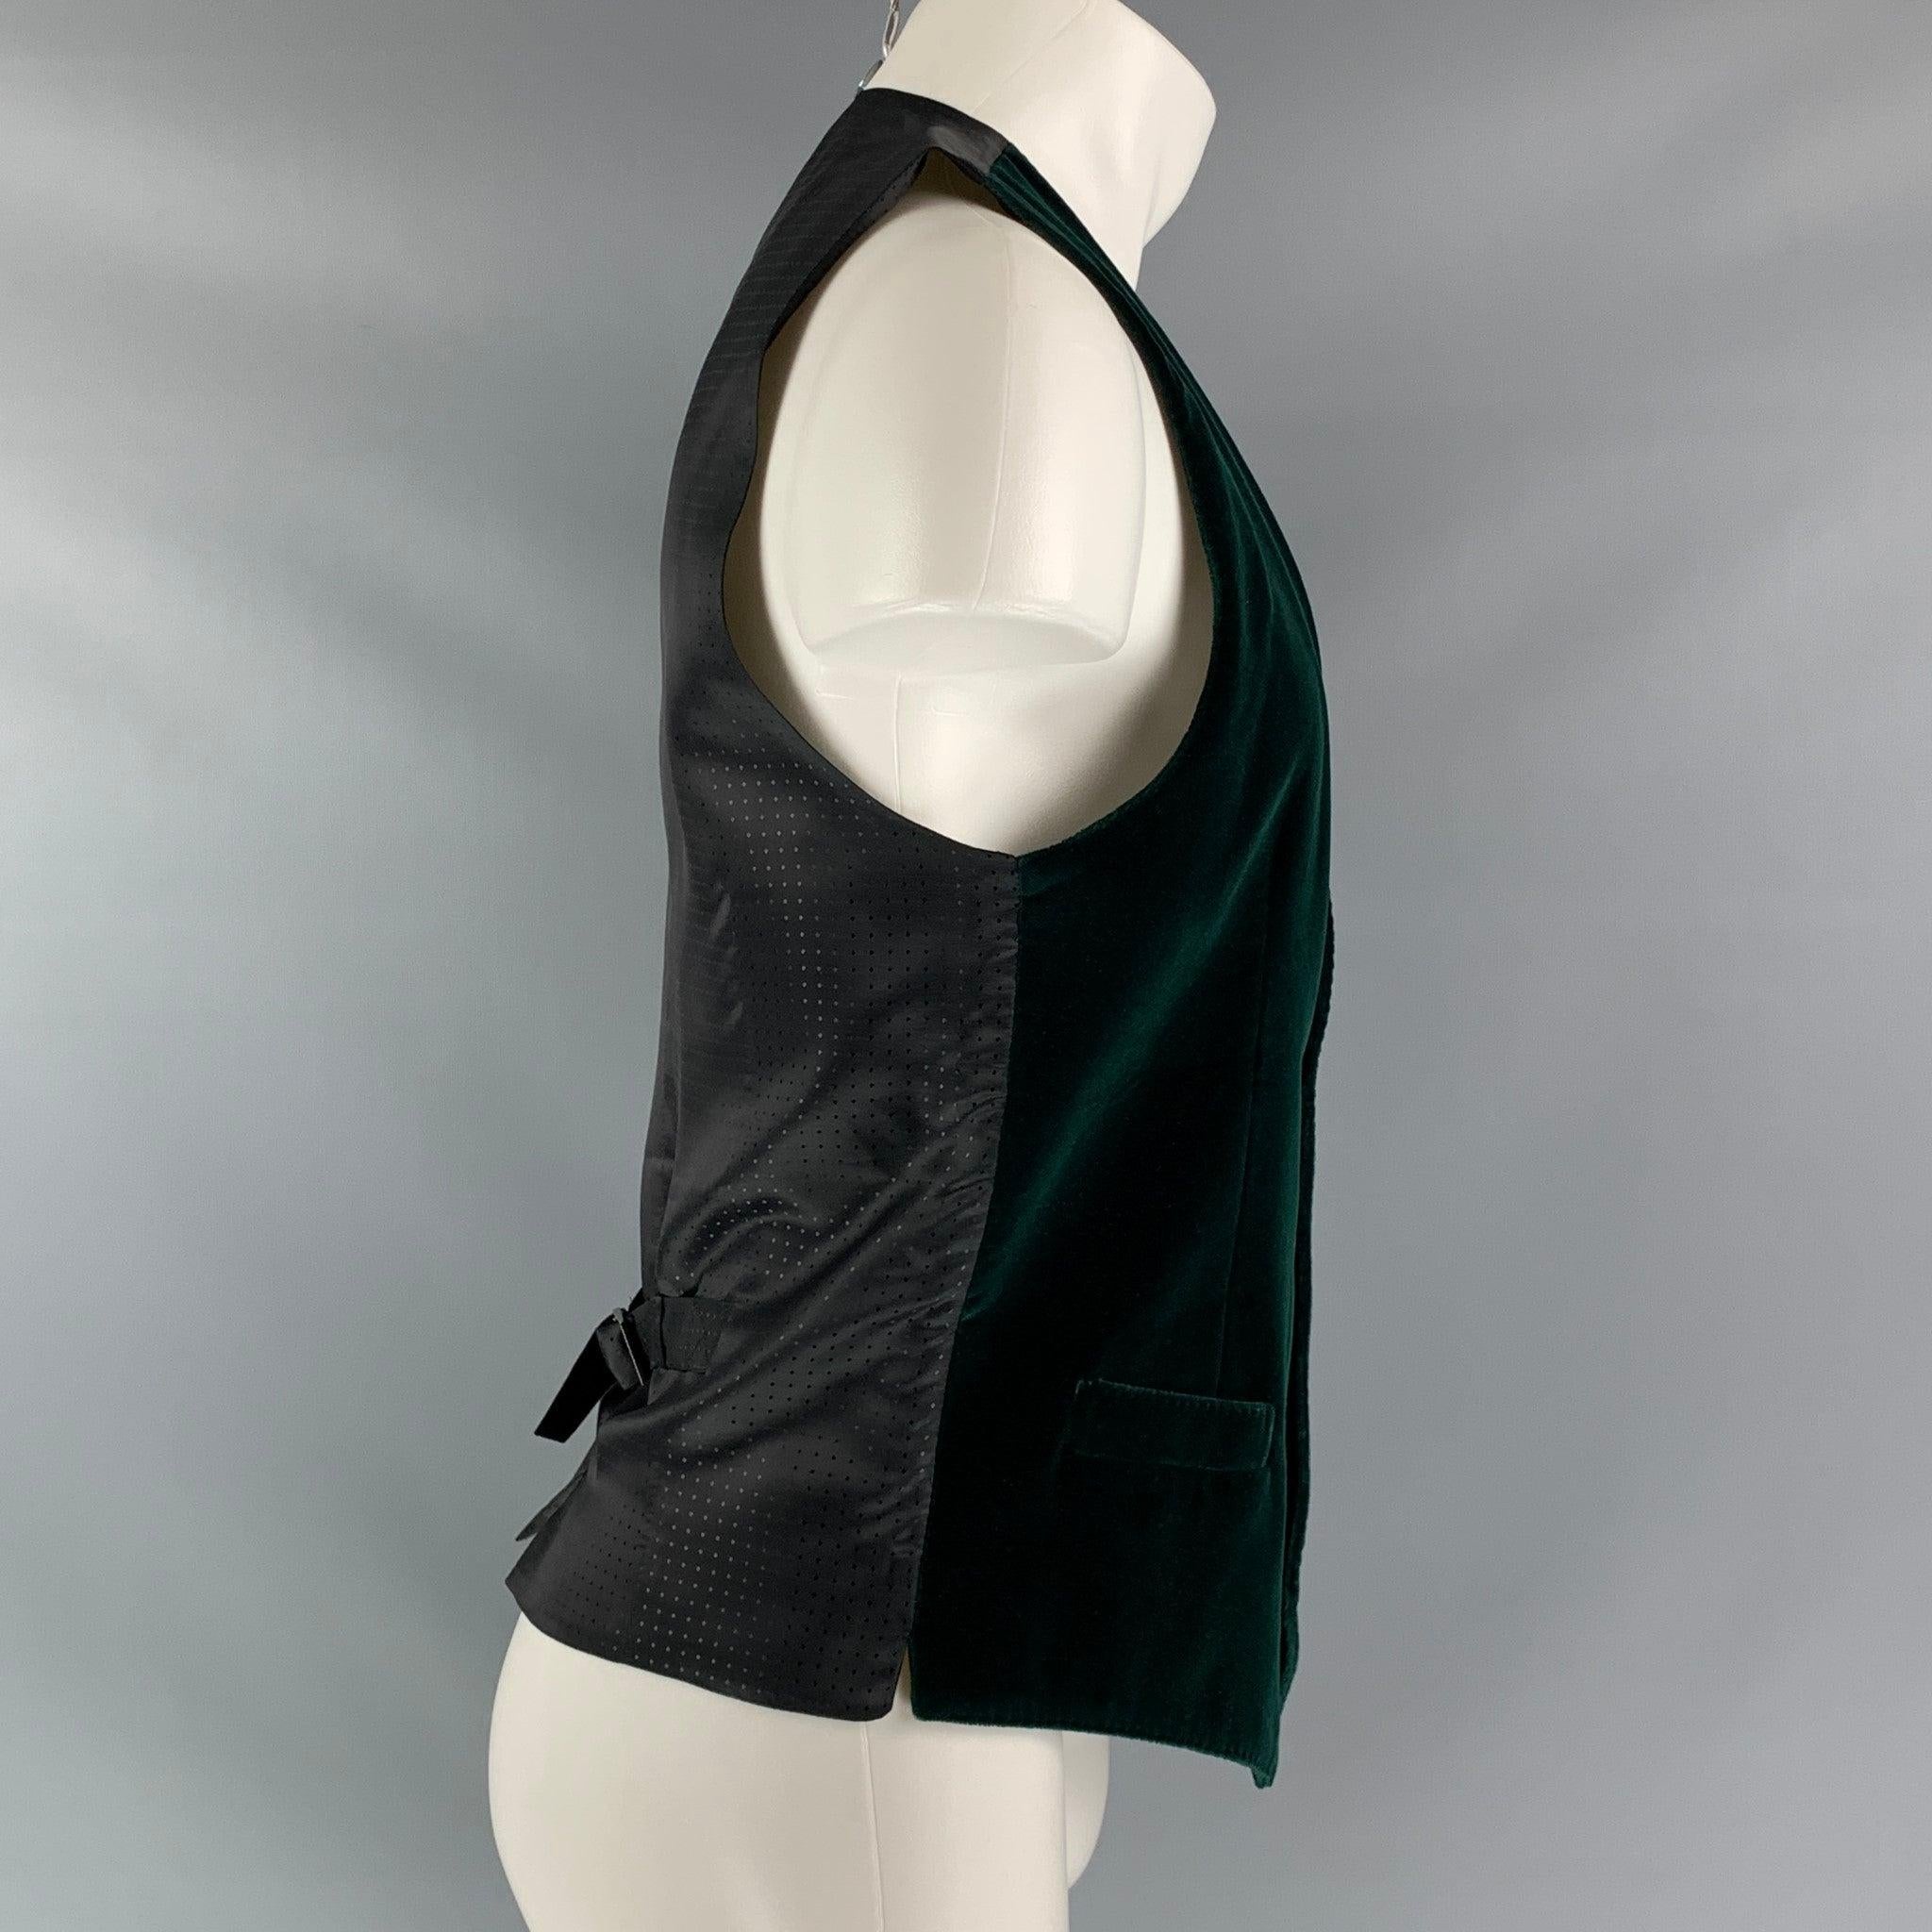 DOLCE & GABBANA dress vest comes in a green esmerald velvet fabric, full lined featuring V-neck, welt pockets, four buttons down closure, black viscose fabric back and adjustable belt. Made in Italy.Excellent Pre-Owned Condition.  
 

 Marked:  48